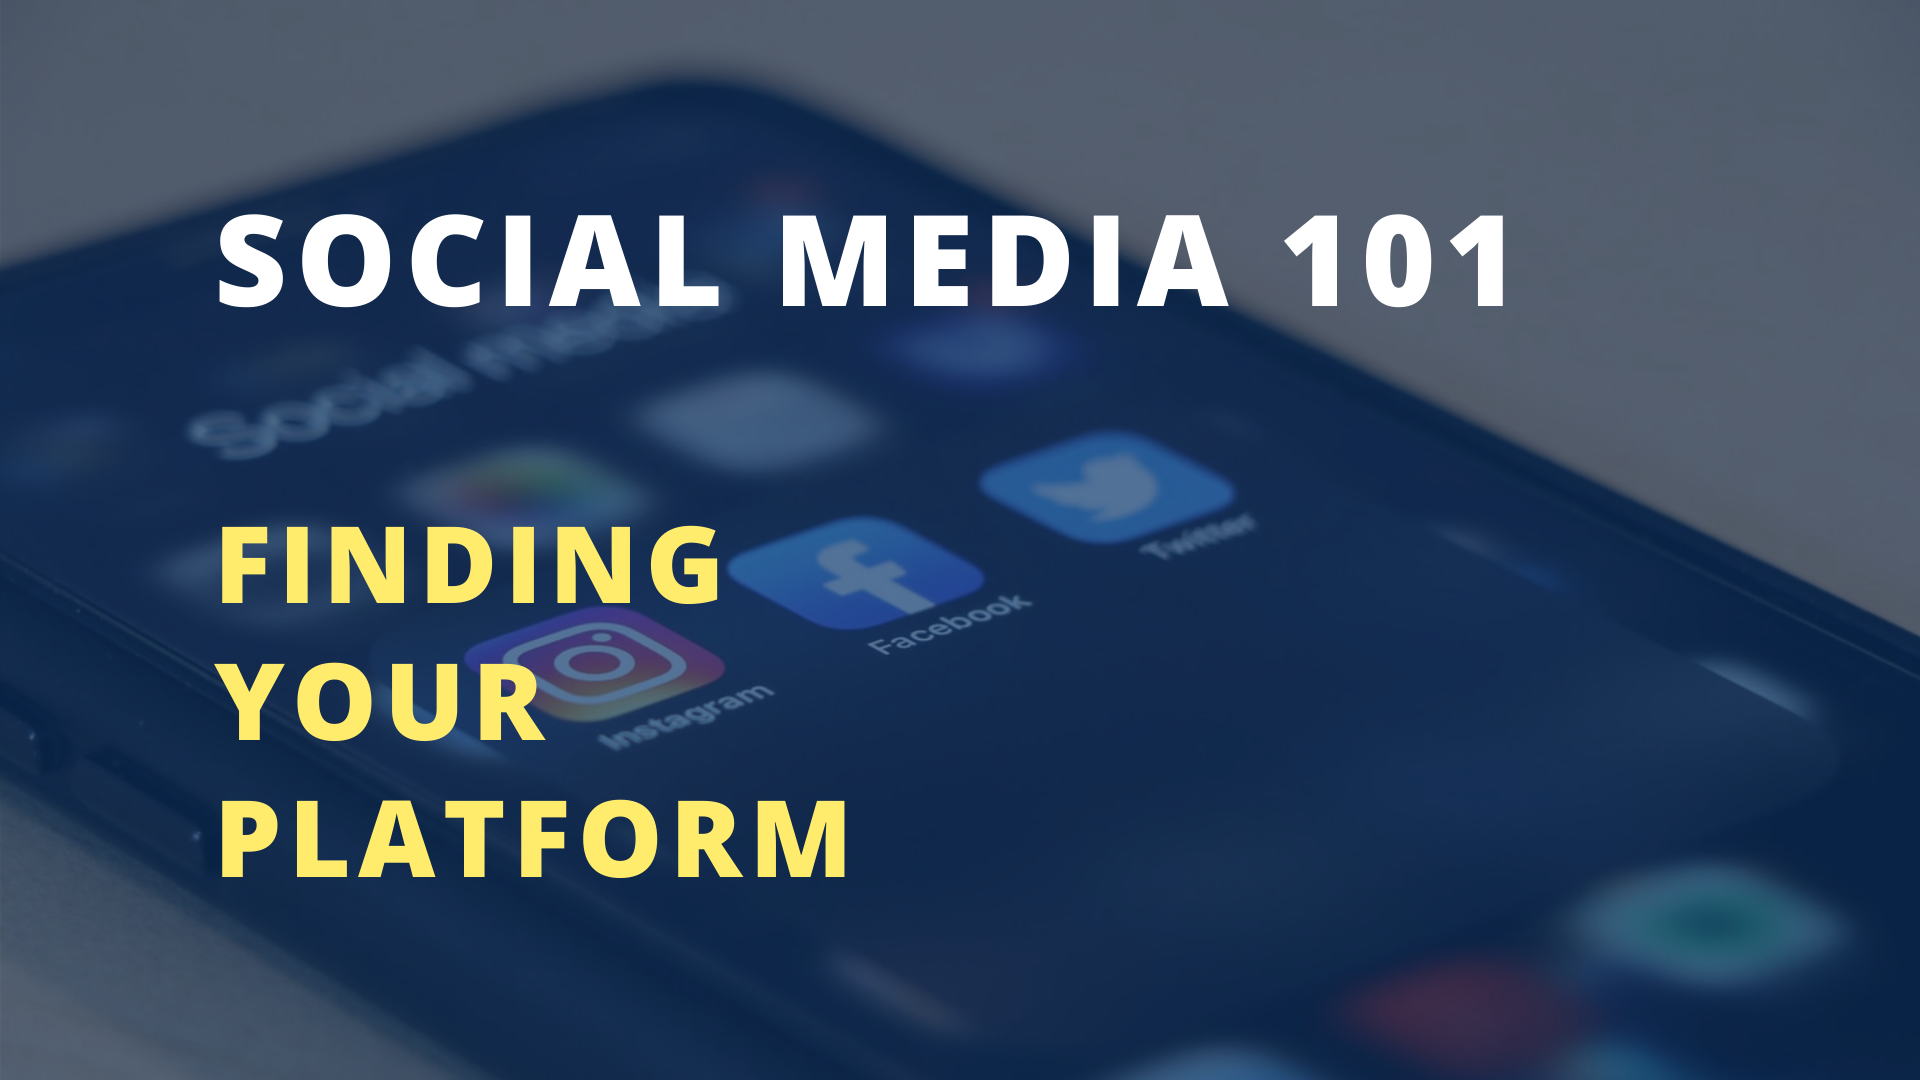 In Social Media 101, Fearey's social media guide walks you through the basics and helps you find the right social media platform for your business or brand.